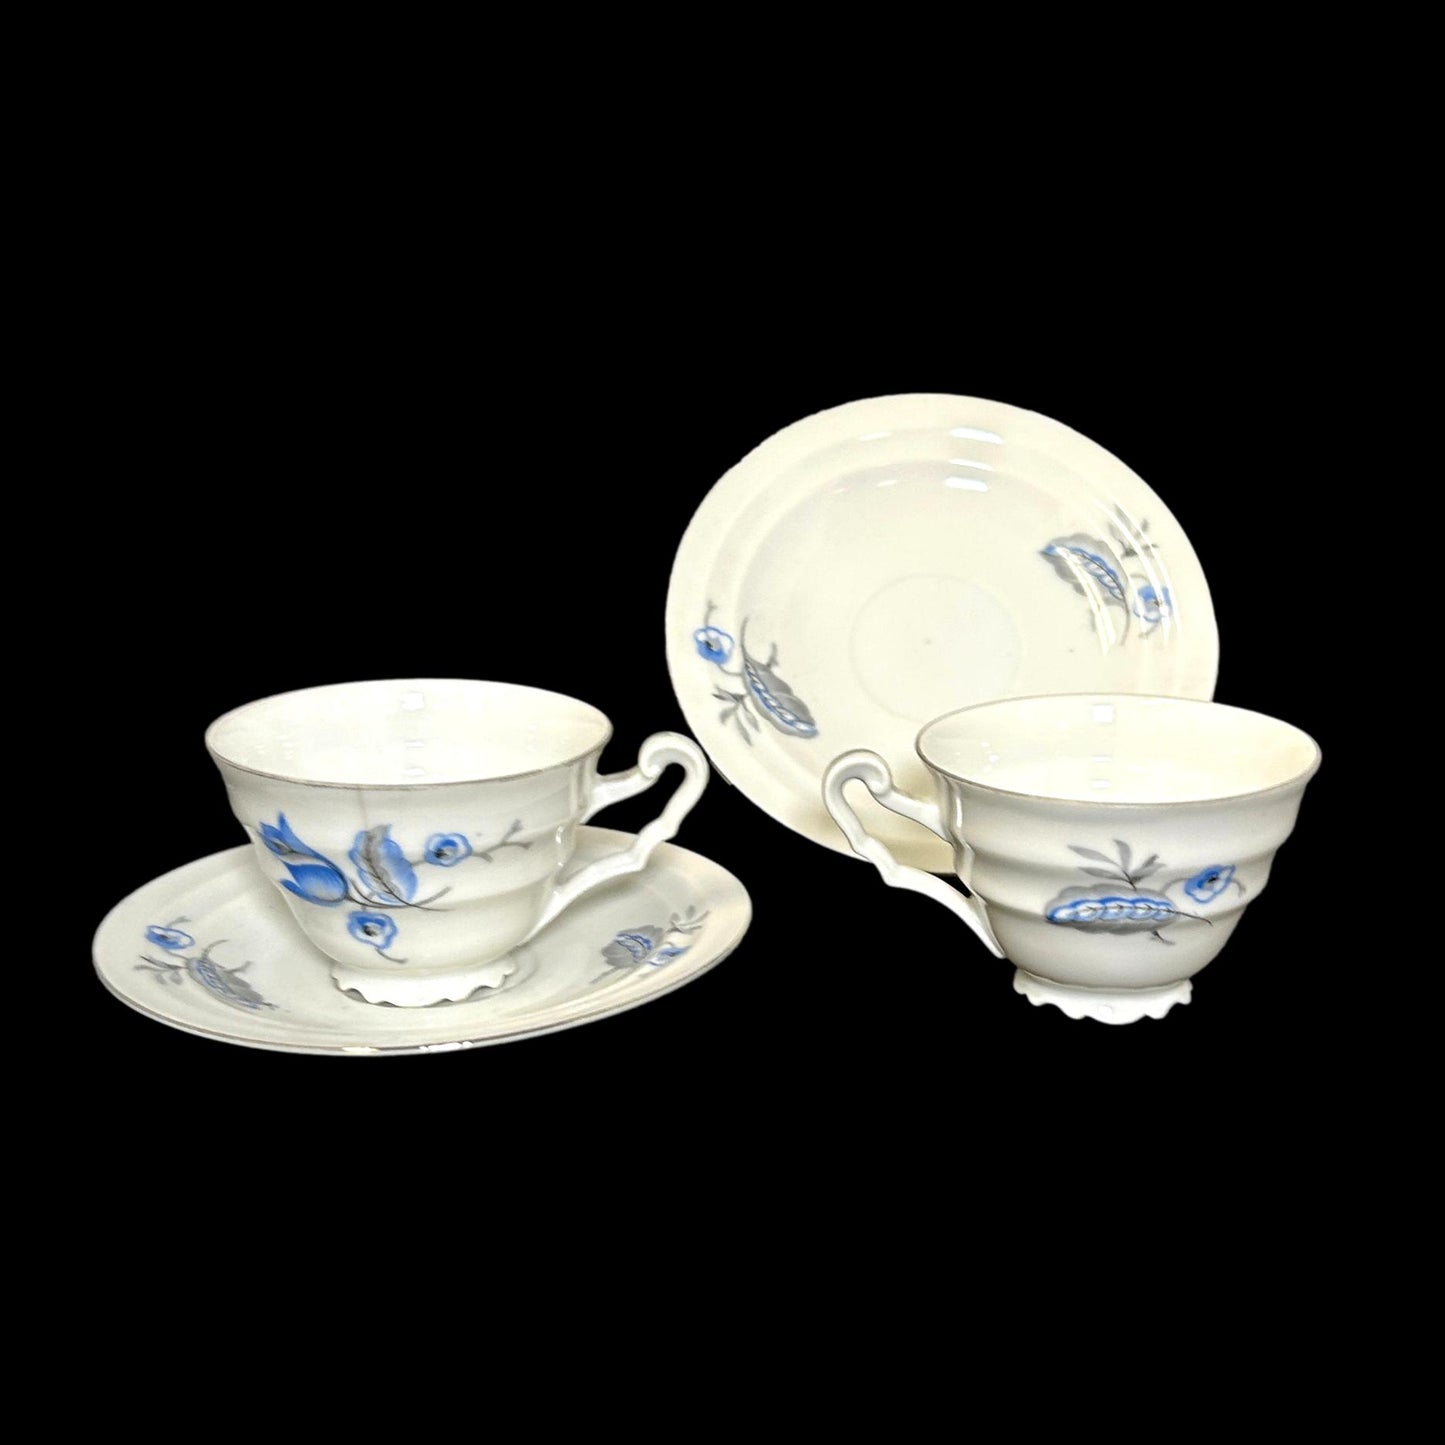 Pair of Teacups and Saucers made in Czechoslovakia